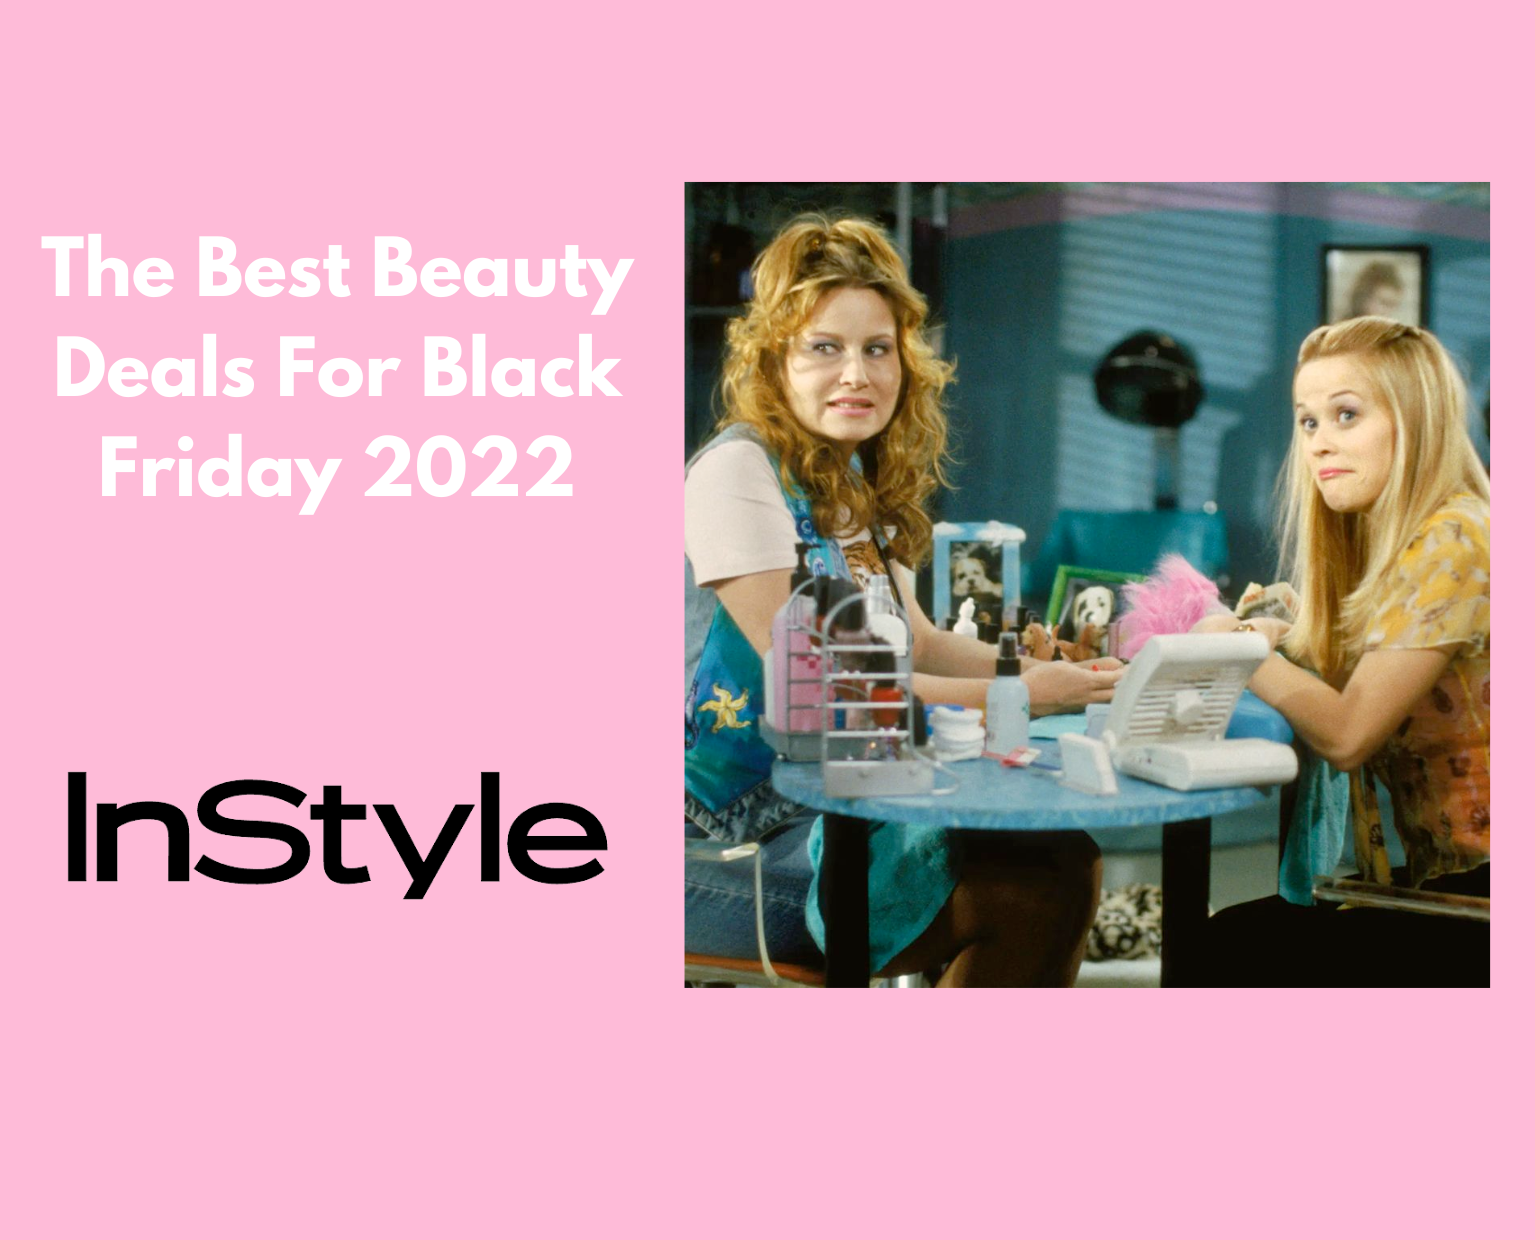 The Best Beauty Deals For Black Friday 2022